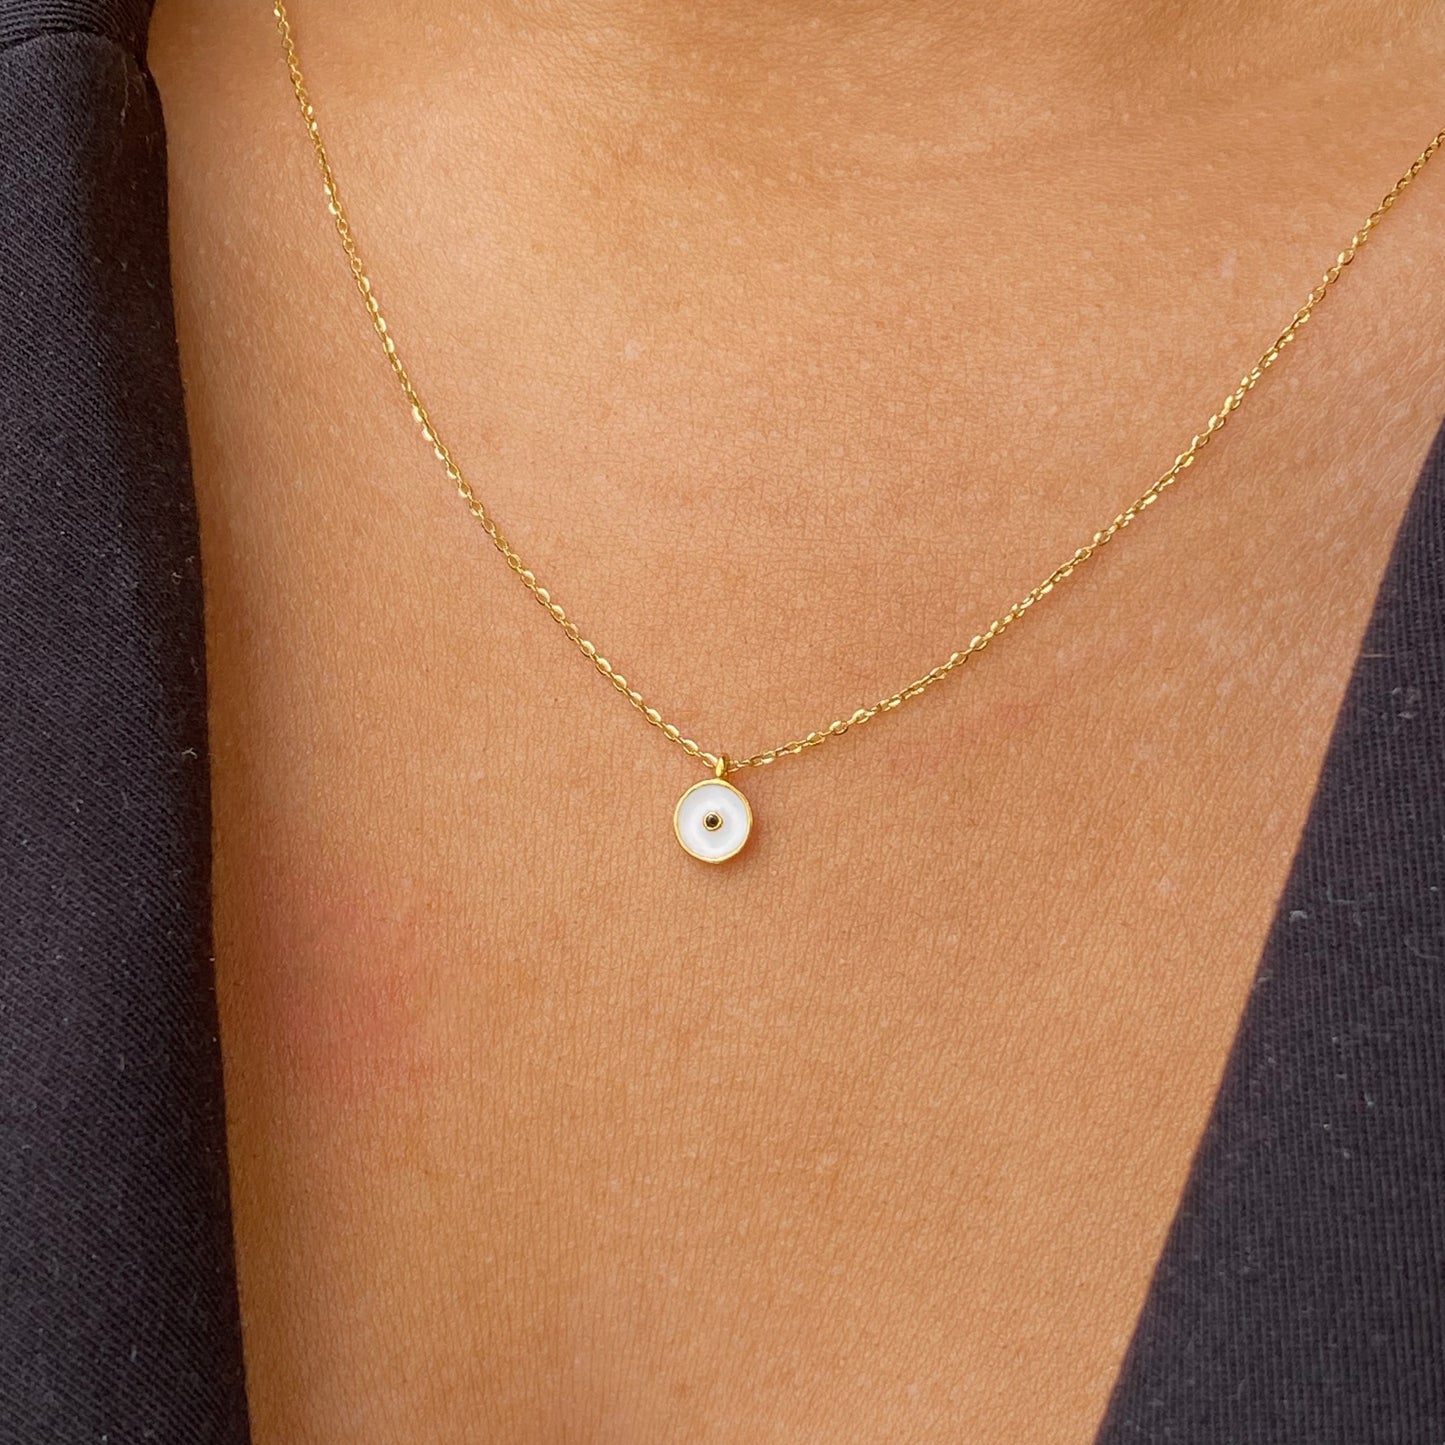 9ct Gold Darling CZ & White Enamel Disc Necklace - John Ross Jewellers